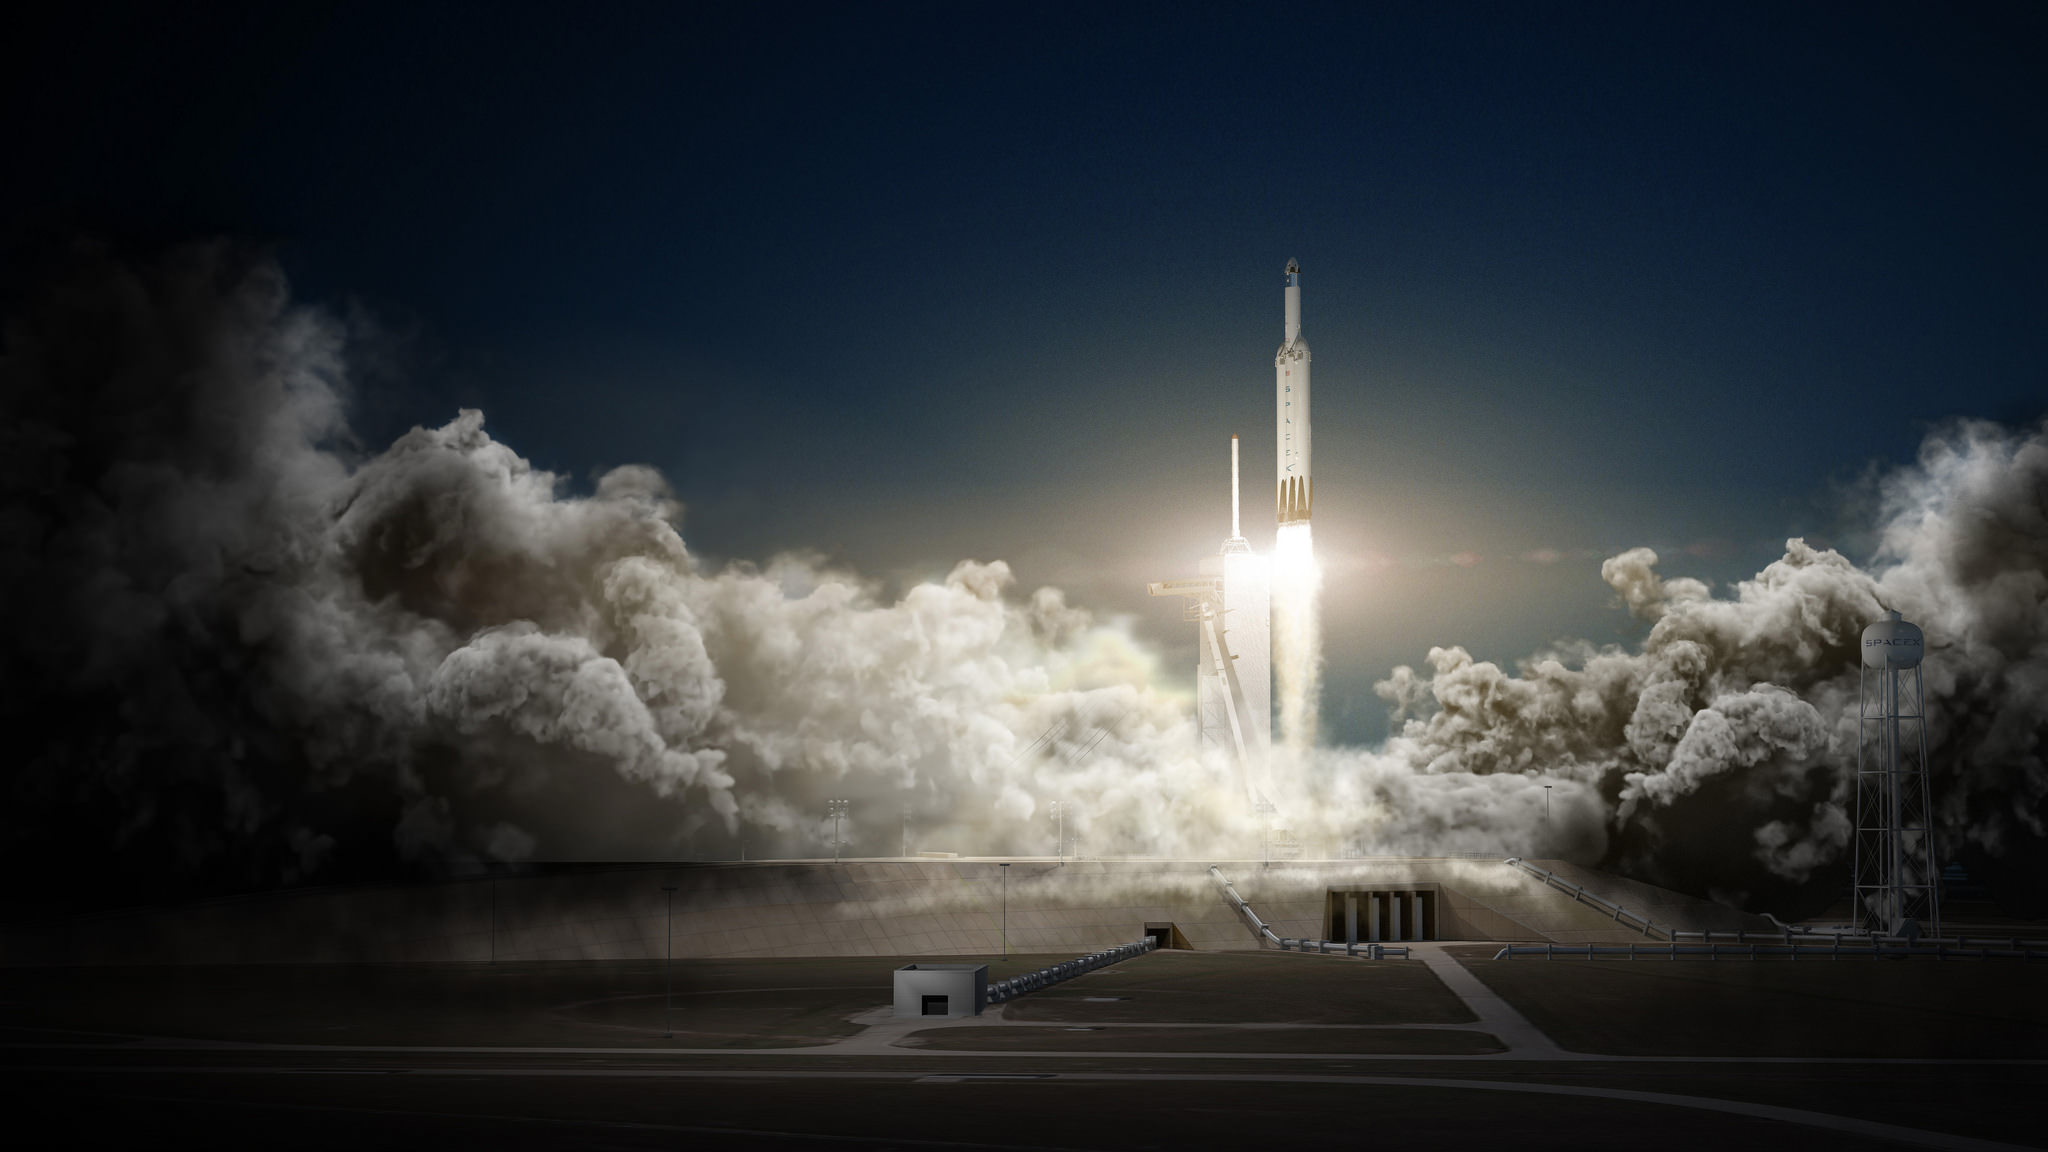 SpaceX Red Dragon spacecraft launches to Mars on SpaceX Falcon Heavy as soon as 2018 in this artists comcept.  Credit: SpaceX